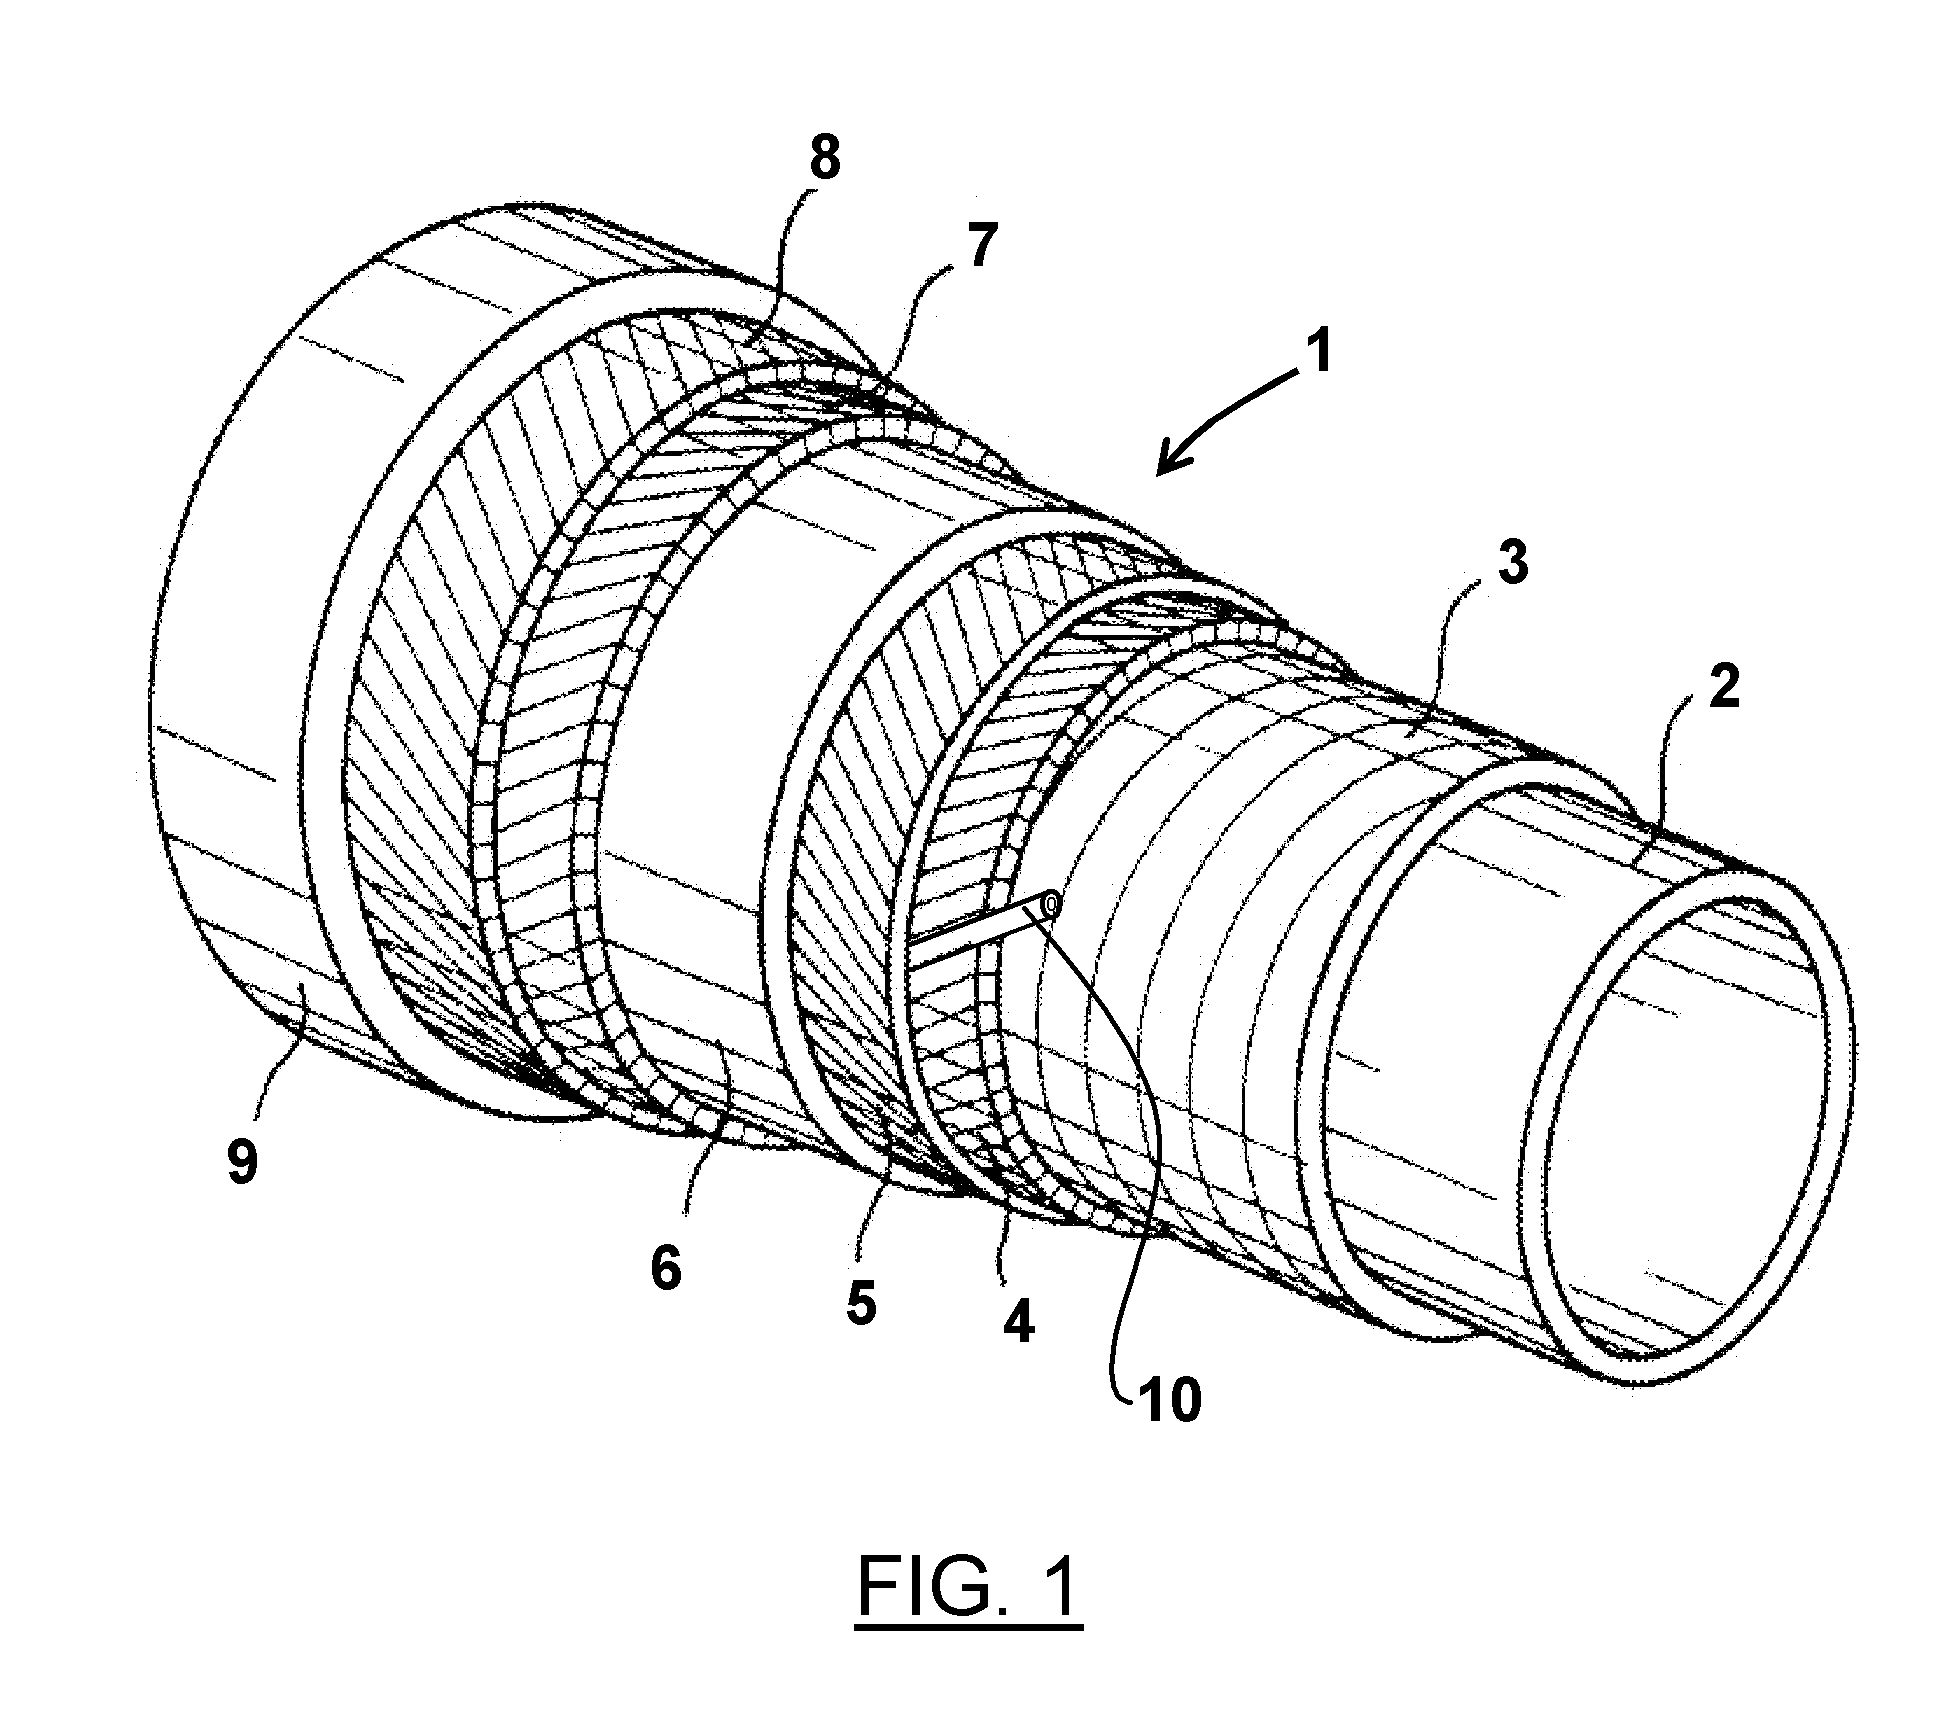 Flexible tubular pipe for transporting gaseous hydrocarbons